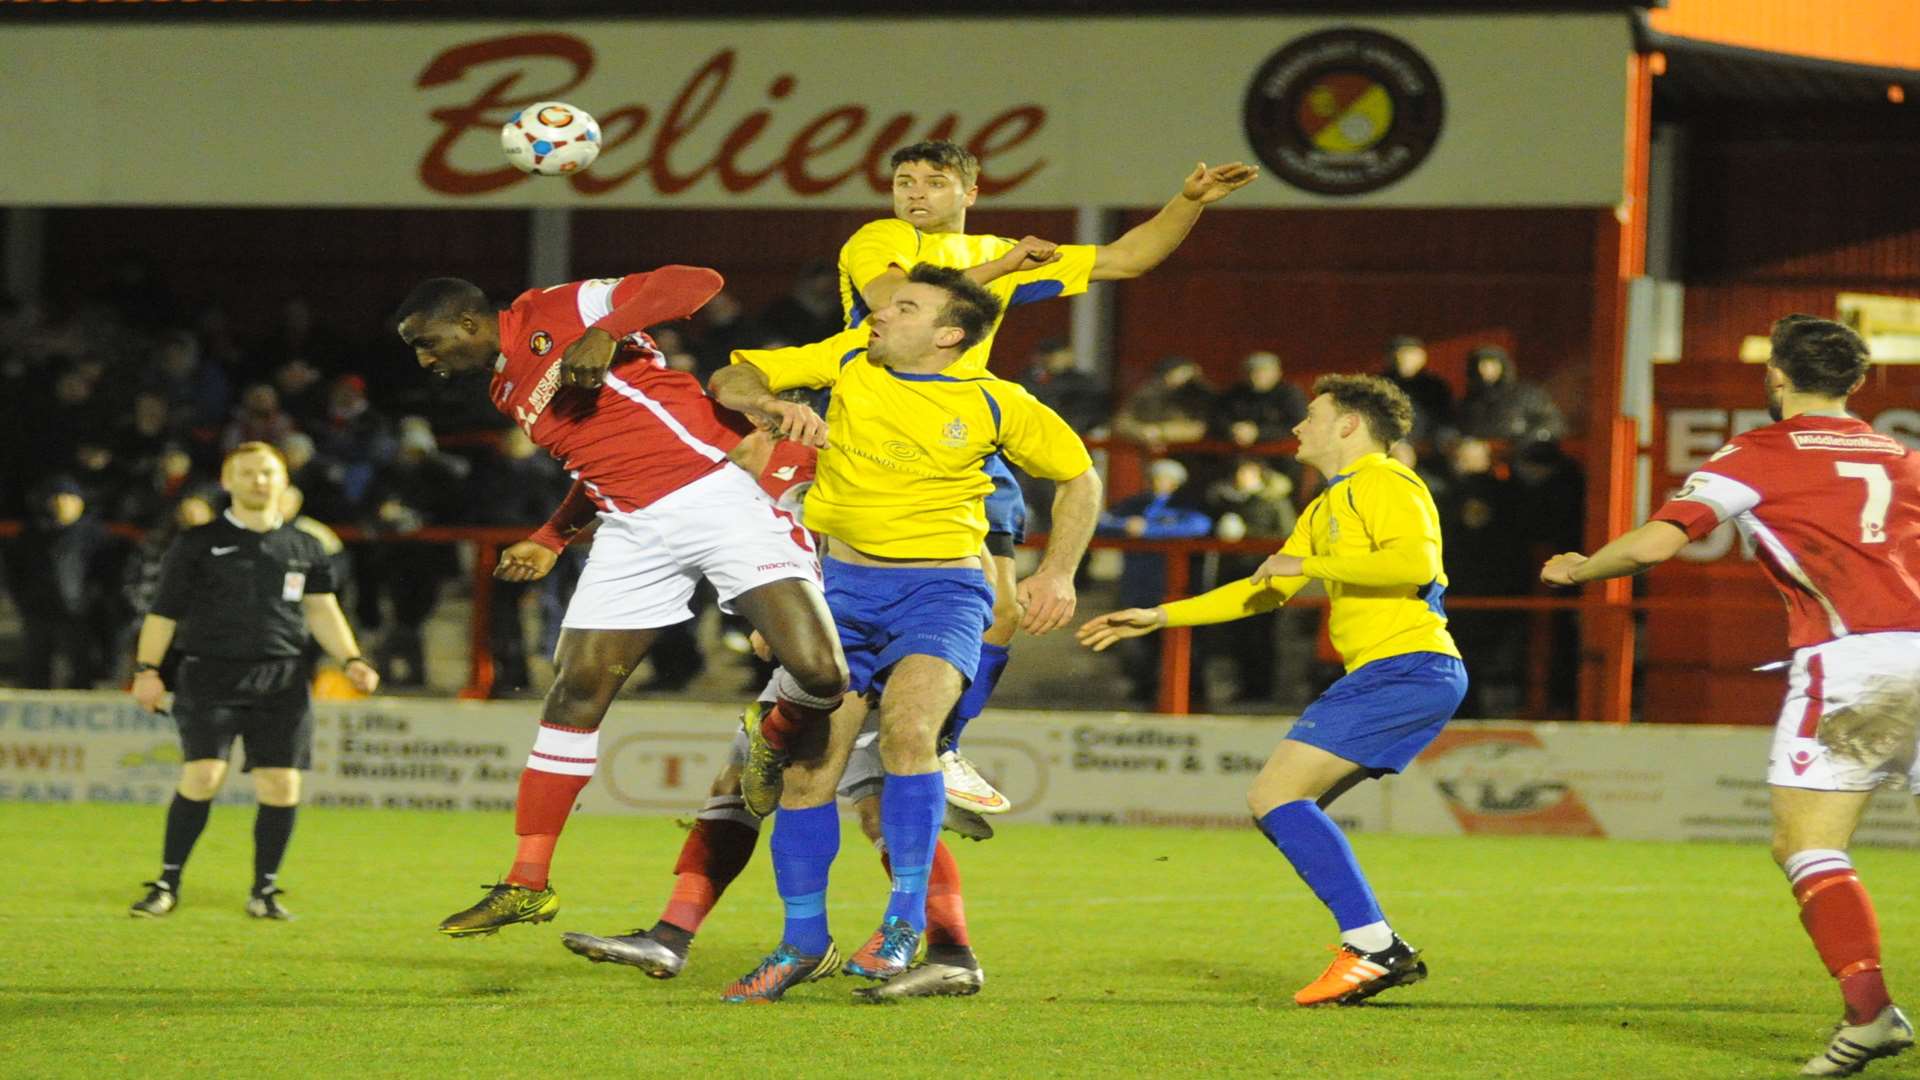 Anthony Acheampong goes up for a header in the St Albans box Picture: Steve Crispe